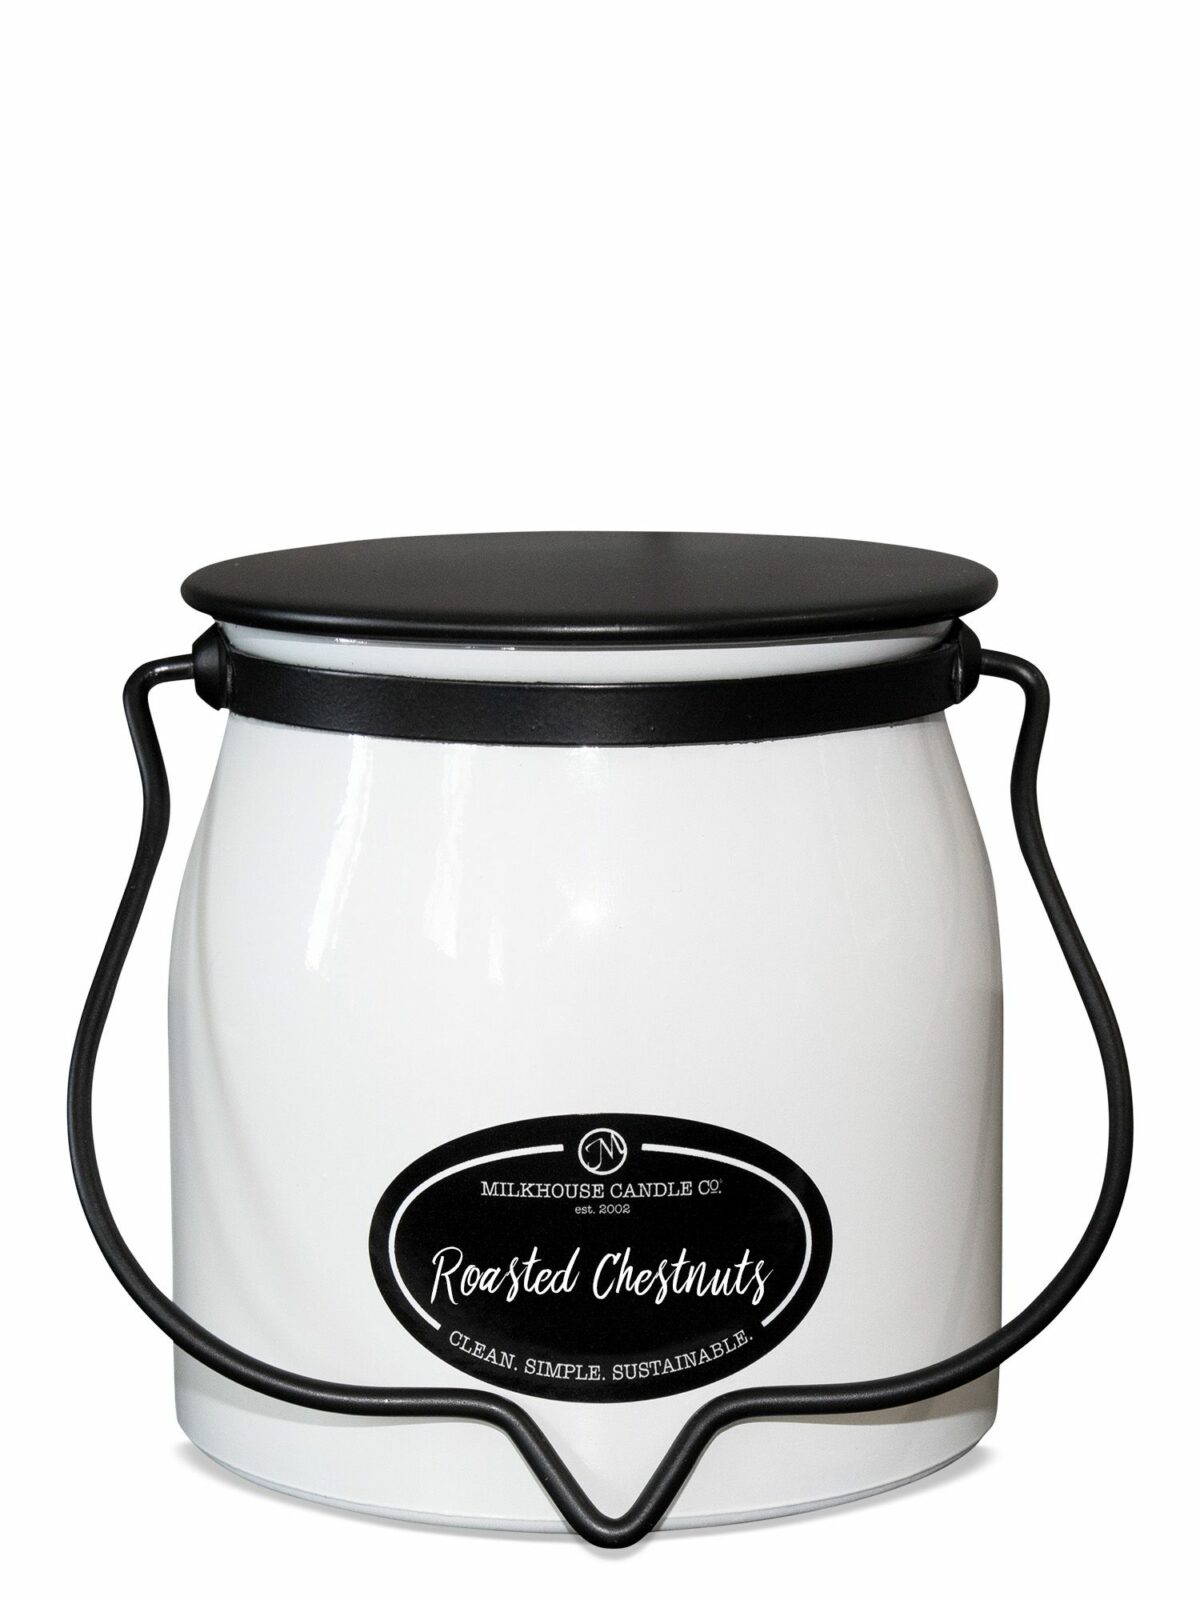 Roasted Chestnuts 16oz Butter Jar Candle by Milkhouse Candle Co.